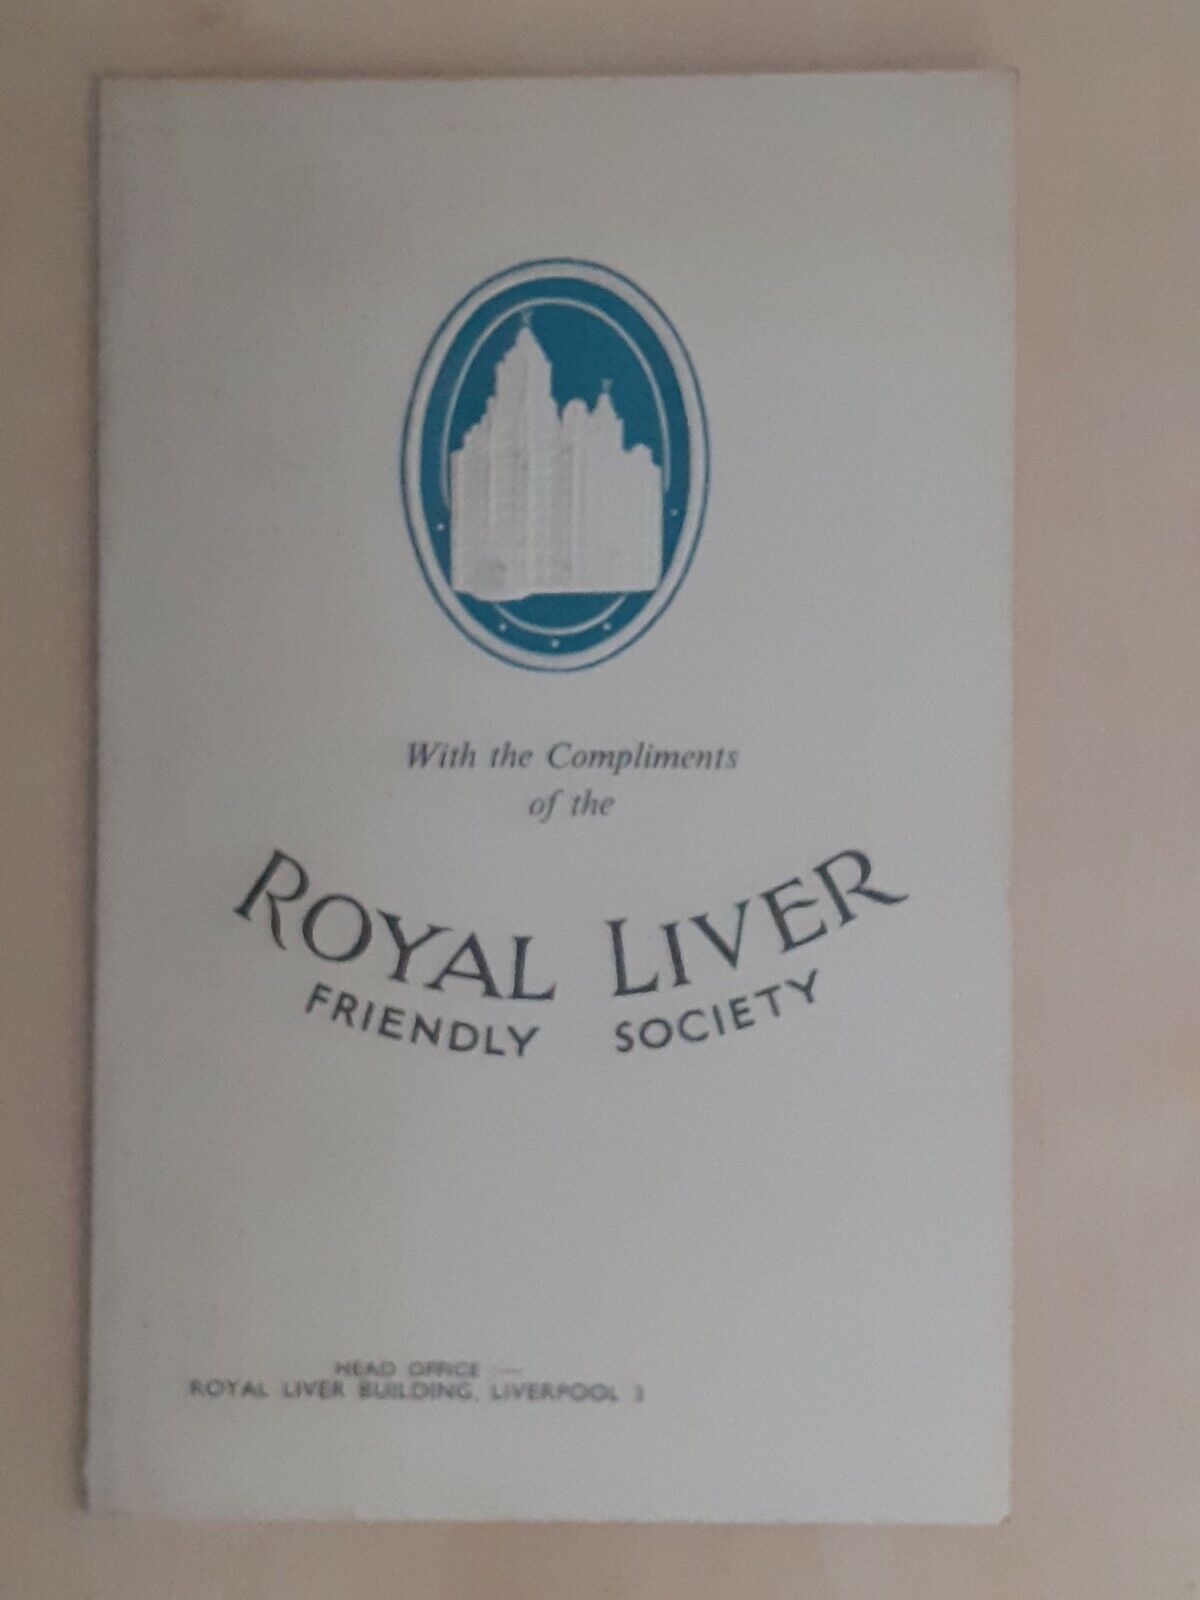 1930s Liverpool Royal Liver Friendly Society Liver Building Information Card